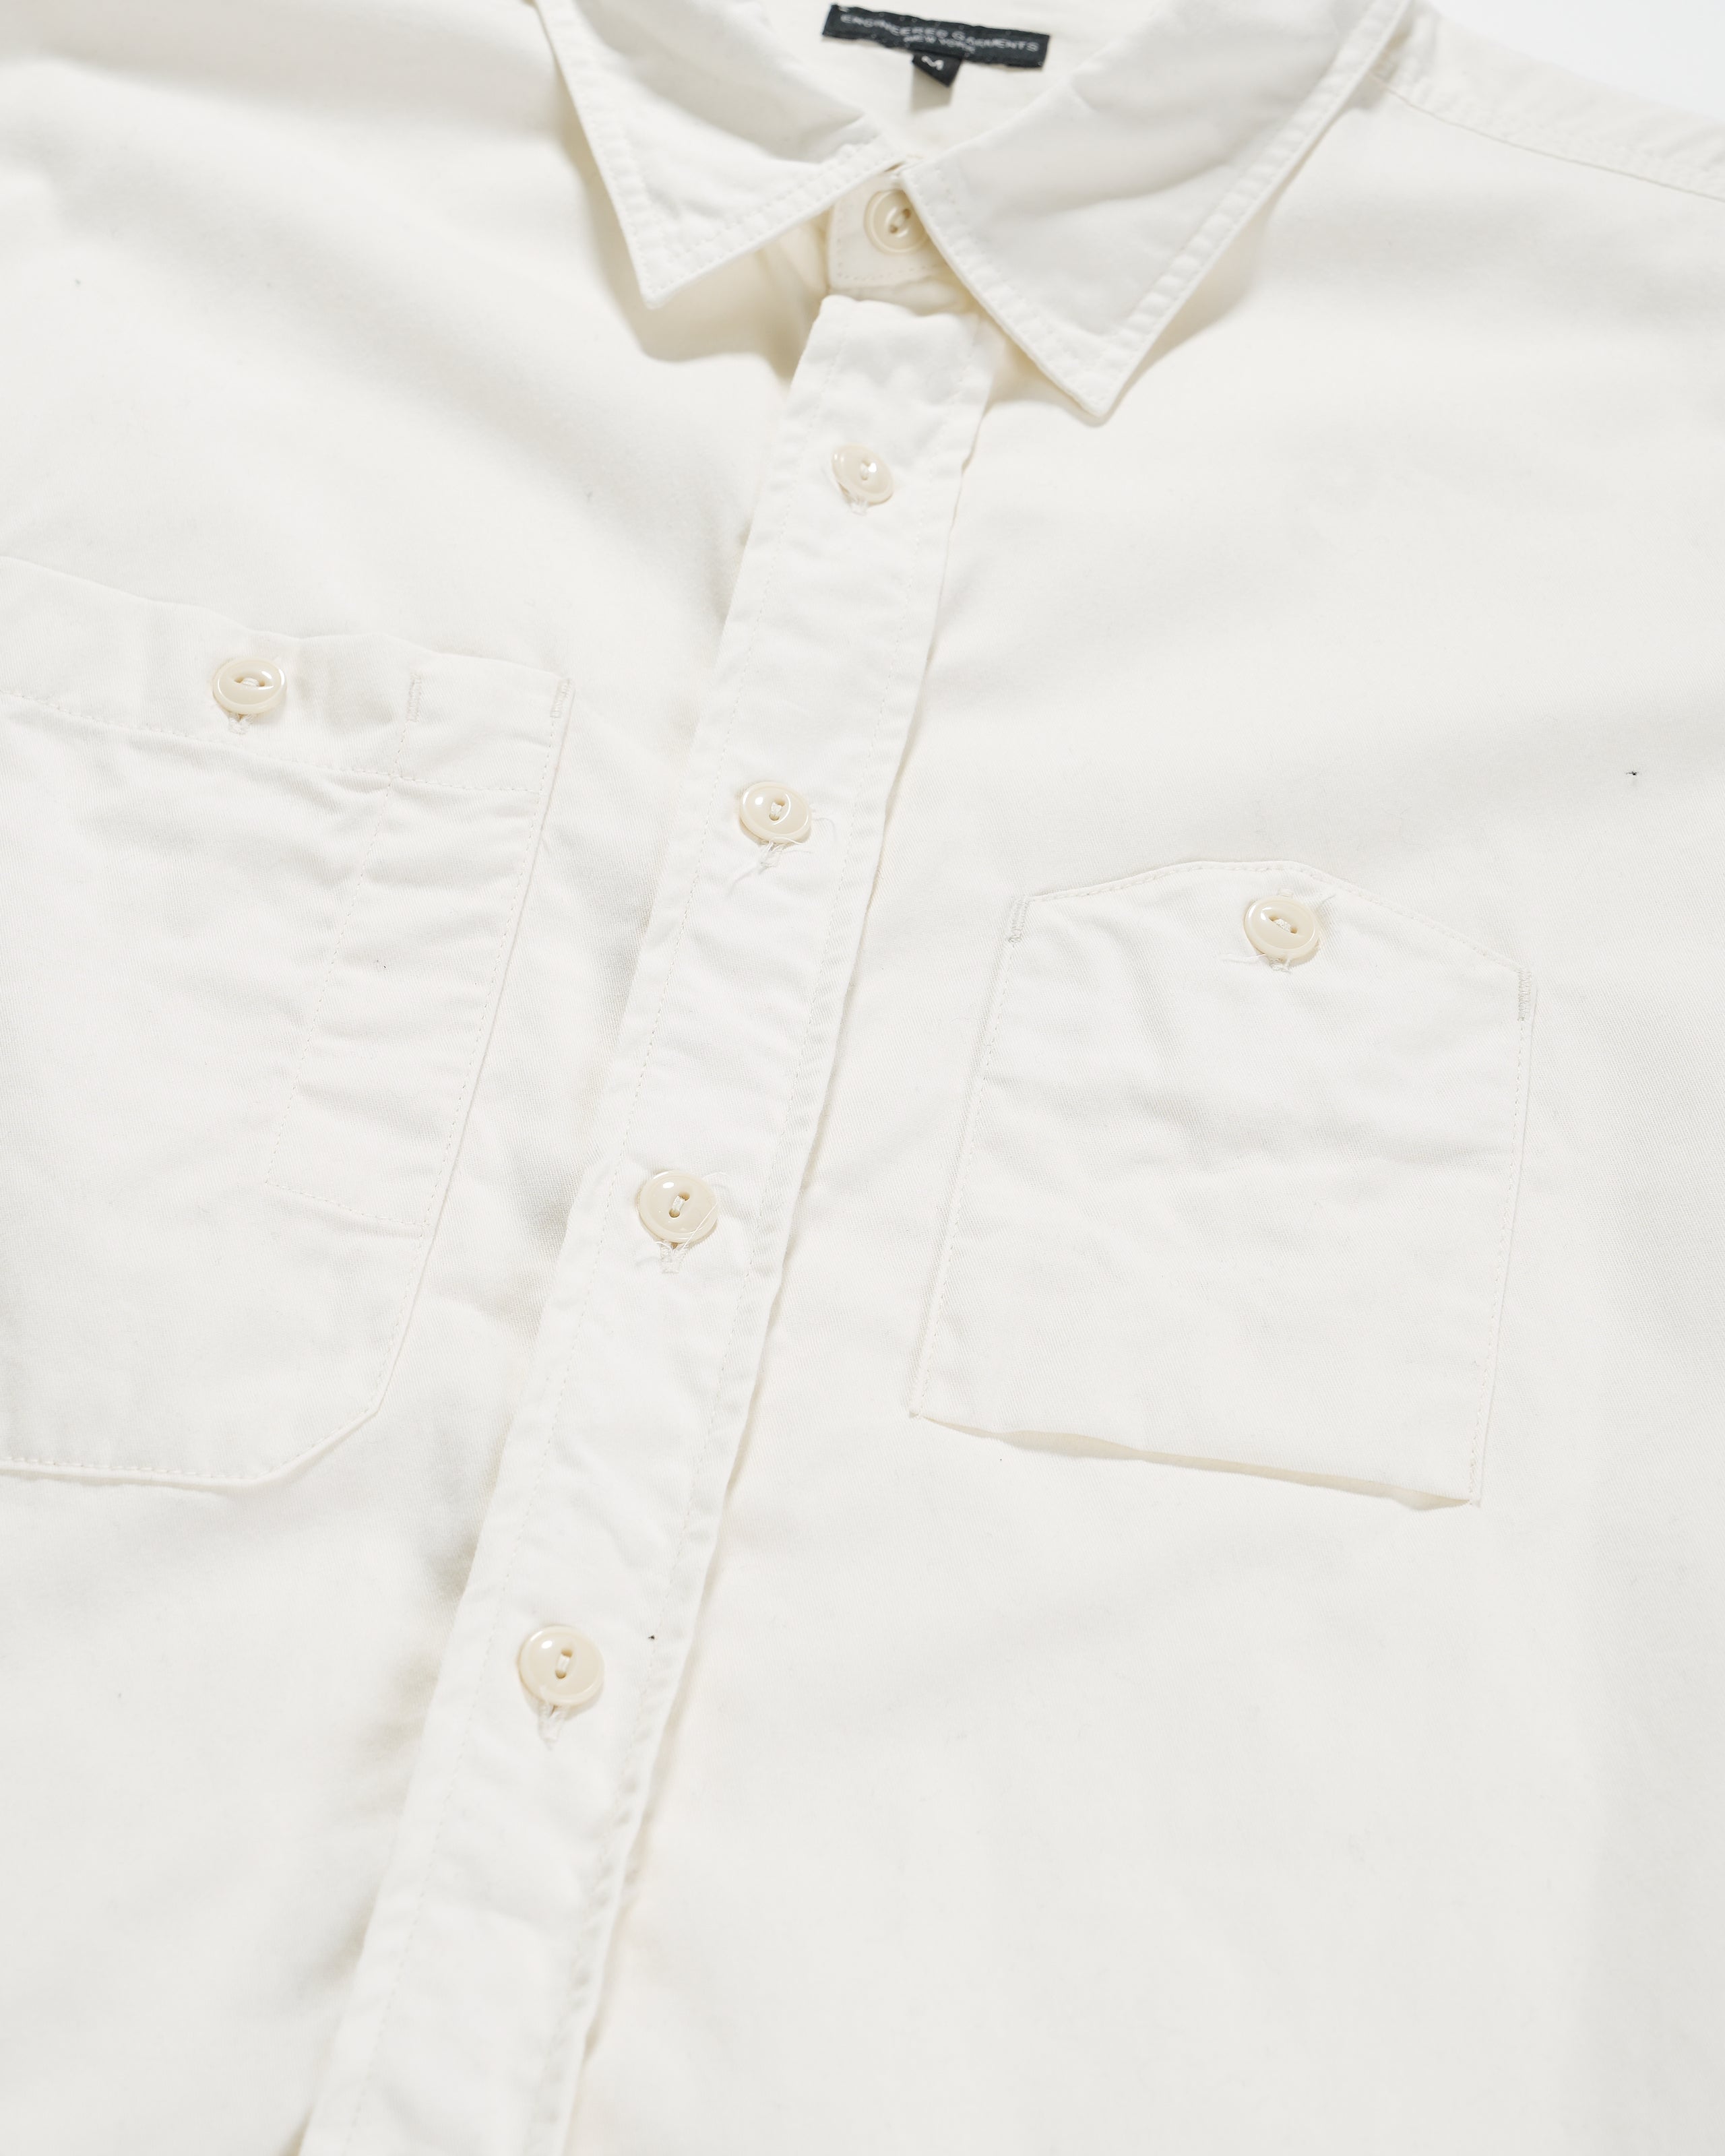 Work Shirt - Ivory Cotton Micro Sanded Twill